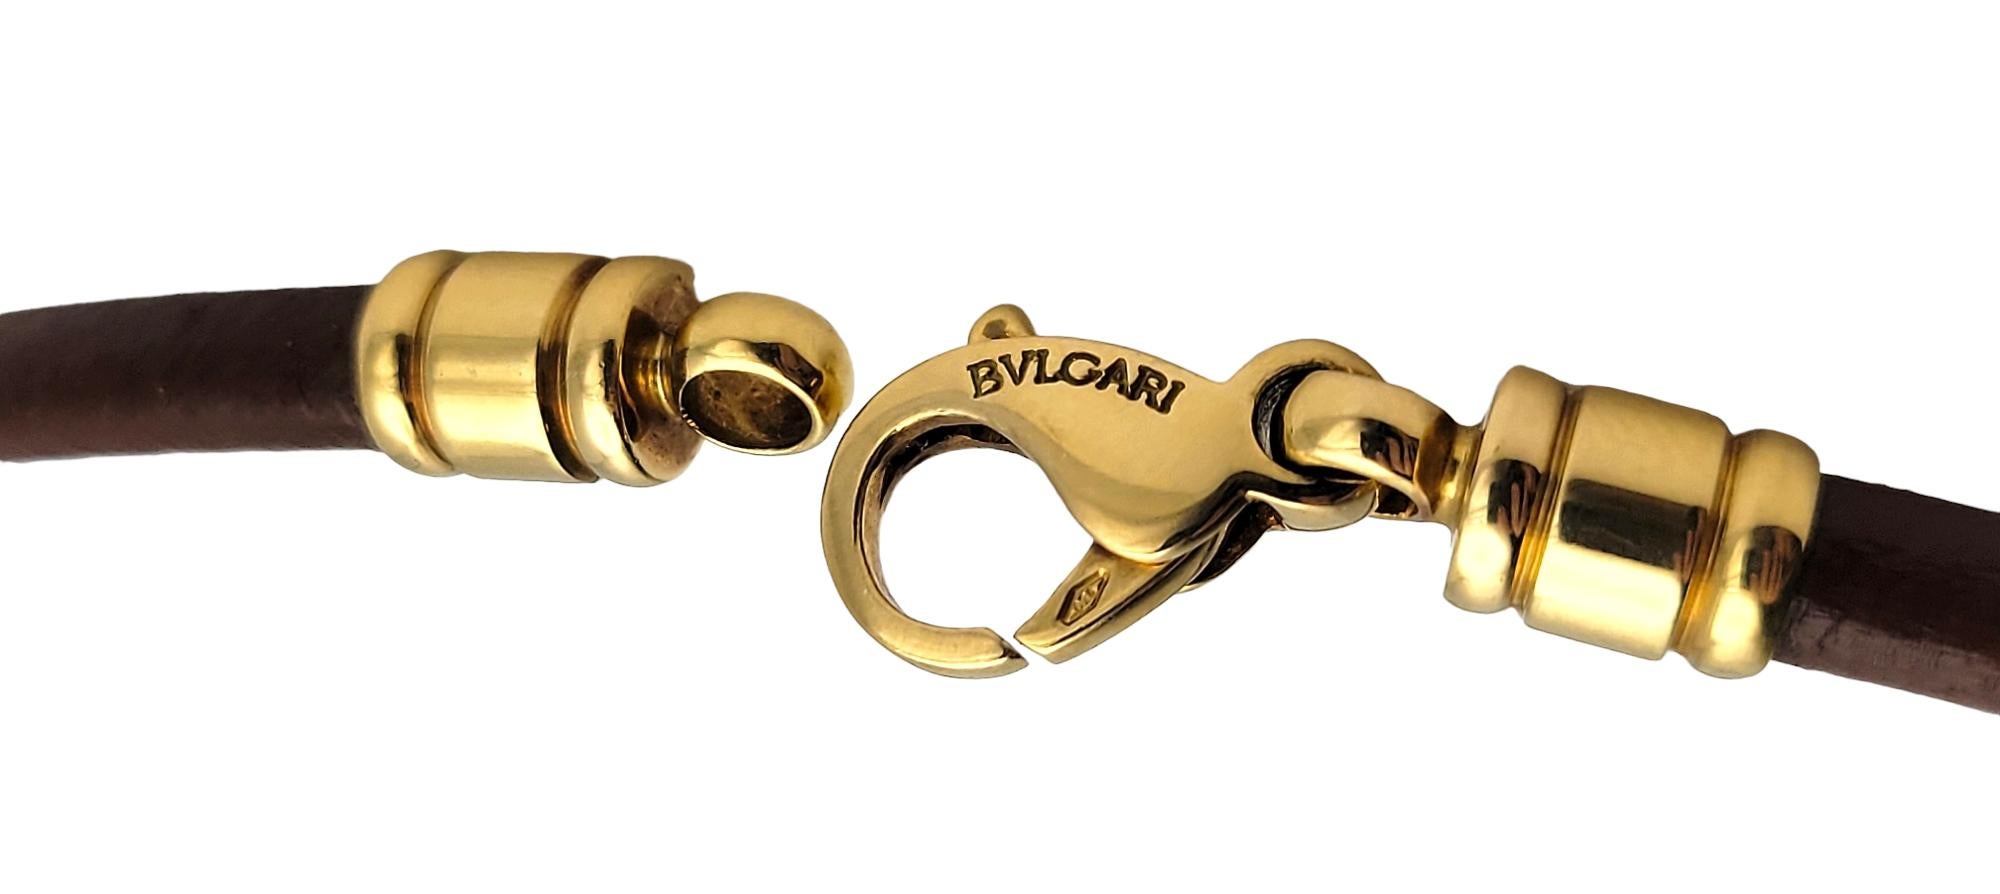 Bvlgari Tondo Snowflake Leather Necklace in 18k Yellow Gold & Stainless Steel 4